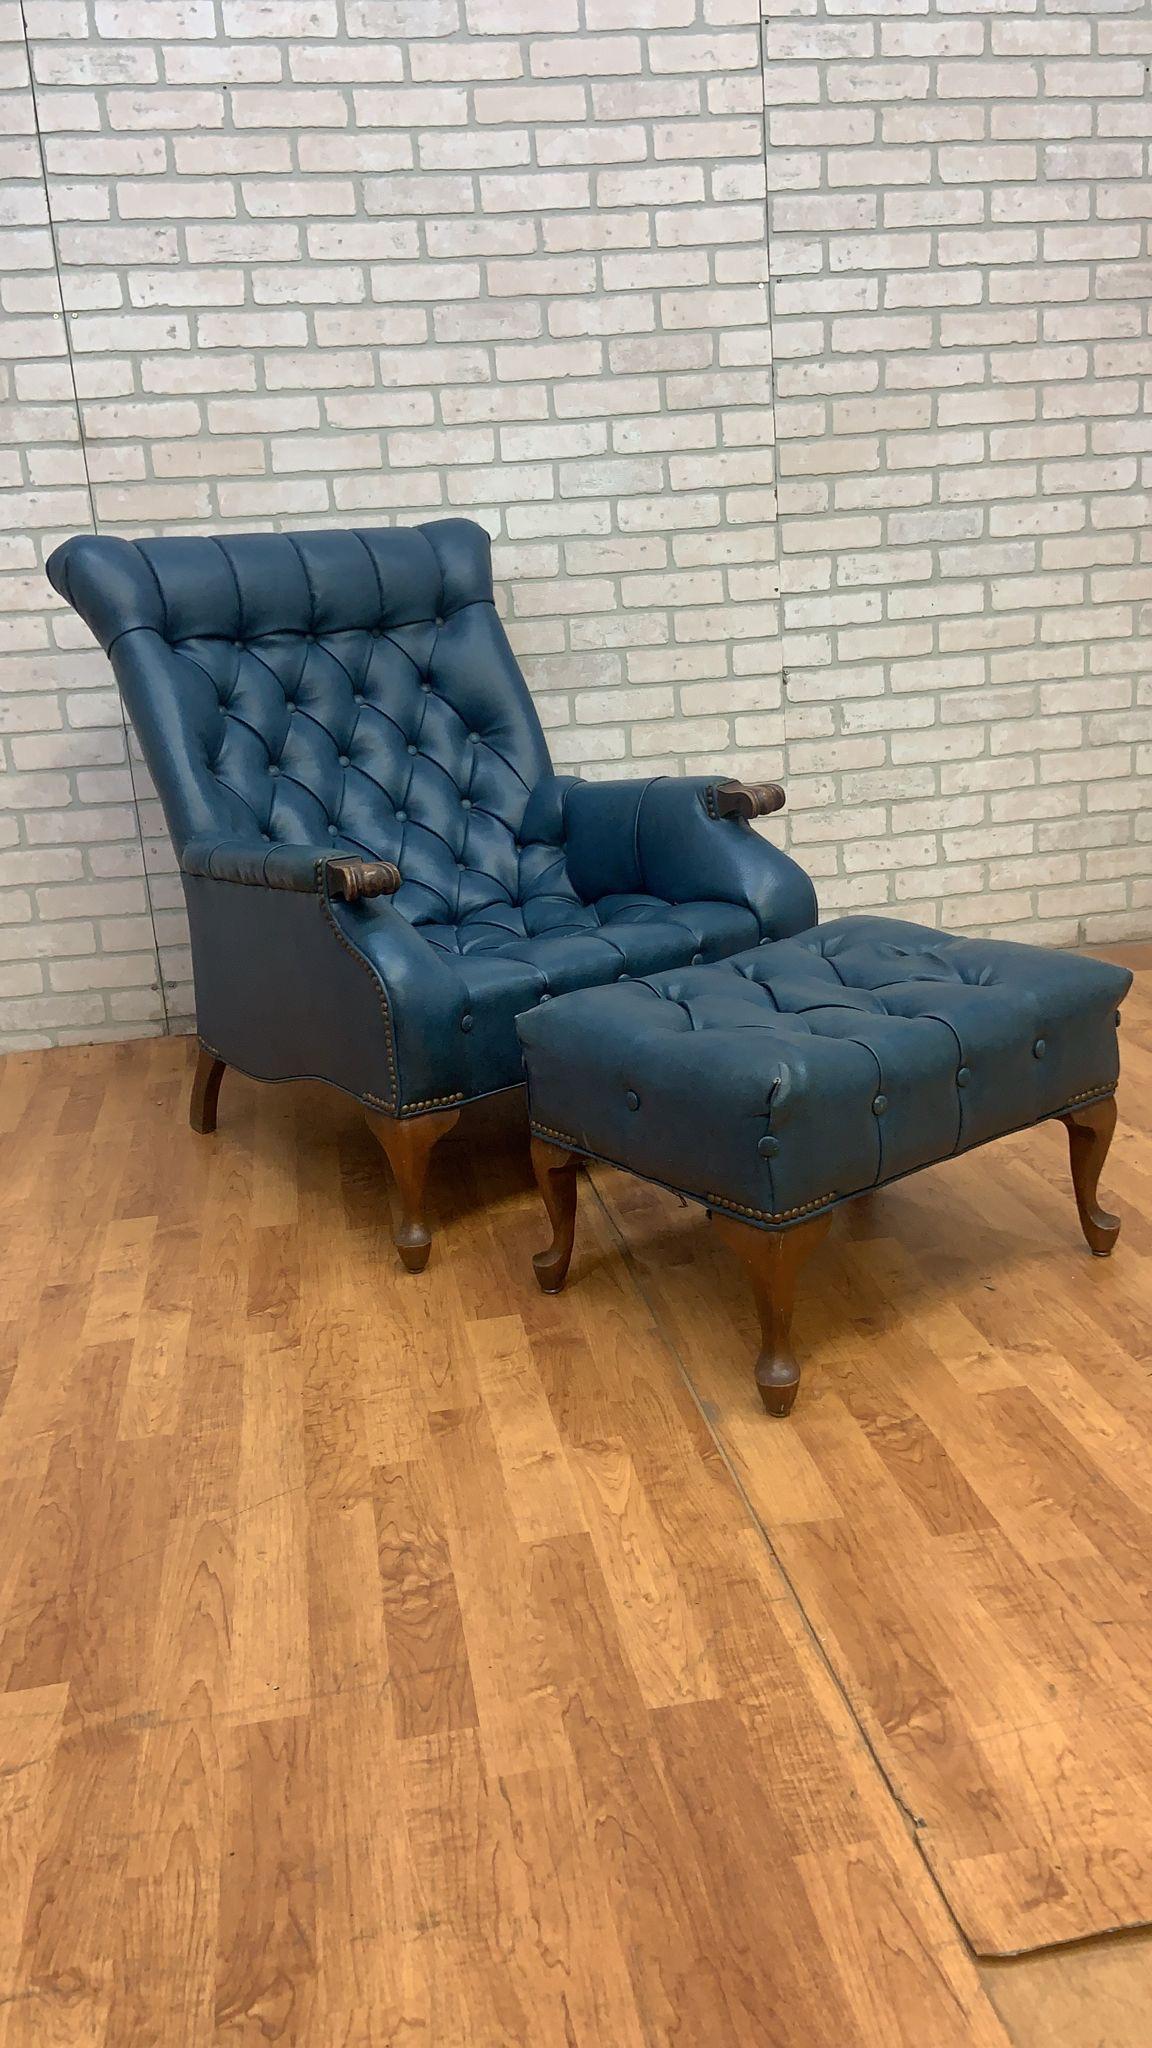 Vintage Sleepy Hollow Blue Tufted Chair and Ottoman - 2 Piece Set 1